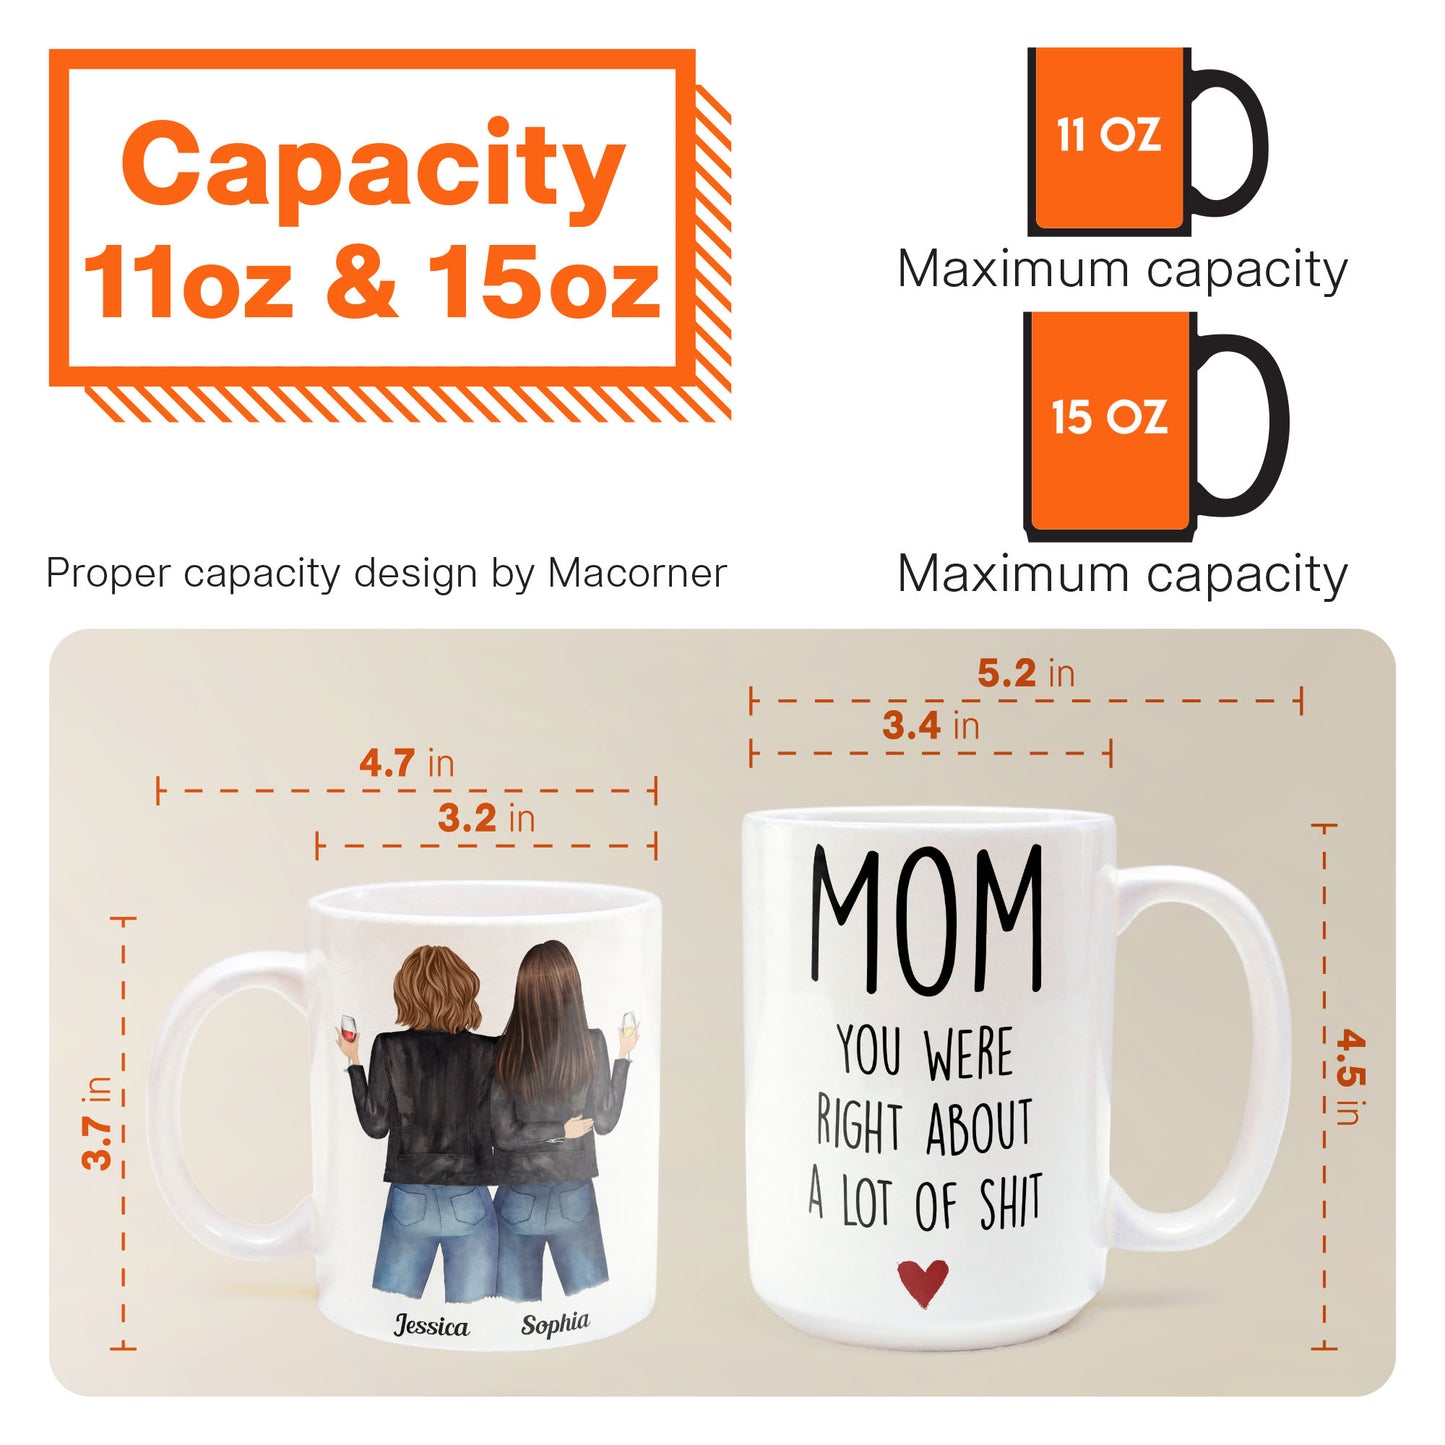 Mom, You Were Right About A Lot Of Shit - Personalized Mug - Birthday, Funny Gift For Mom